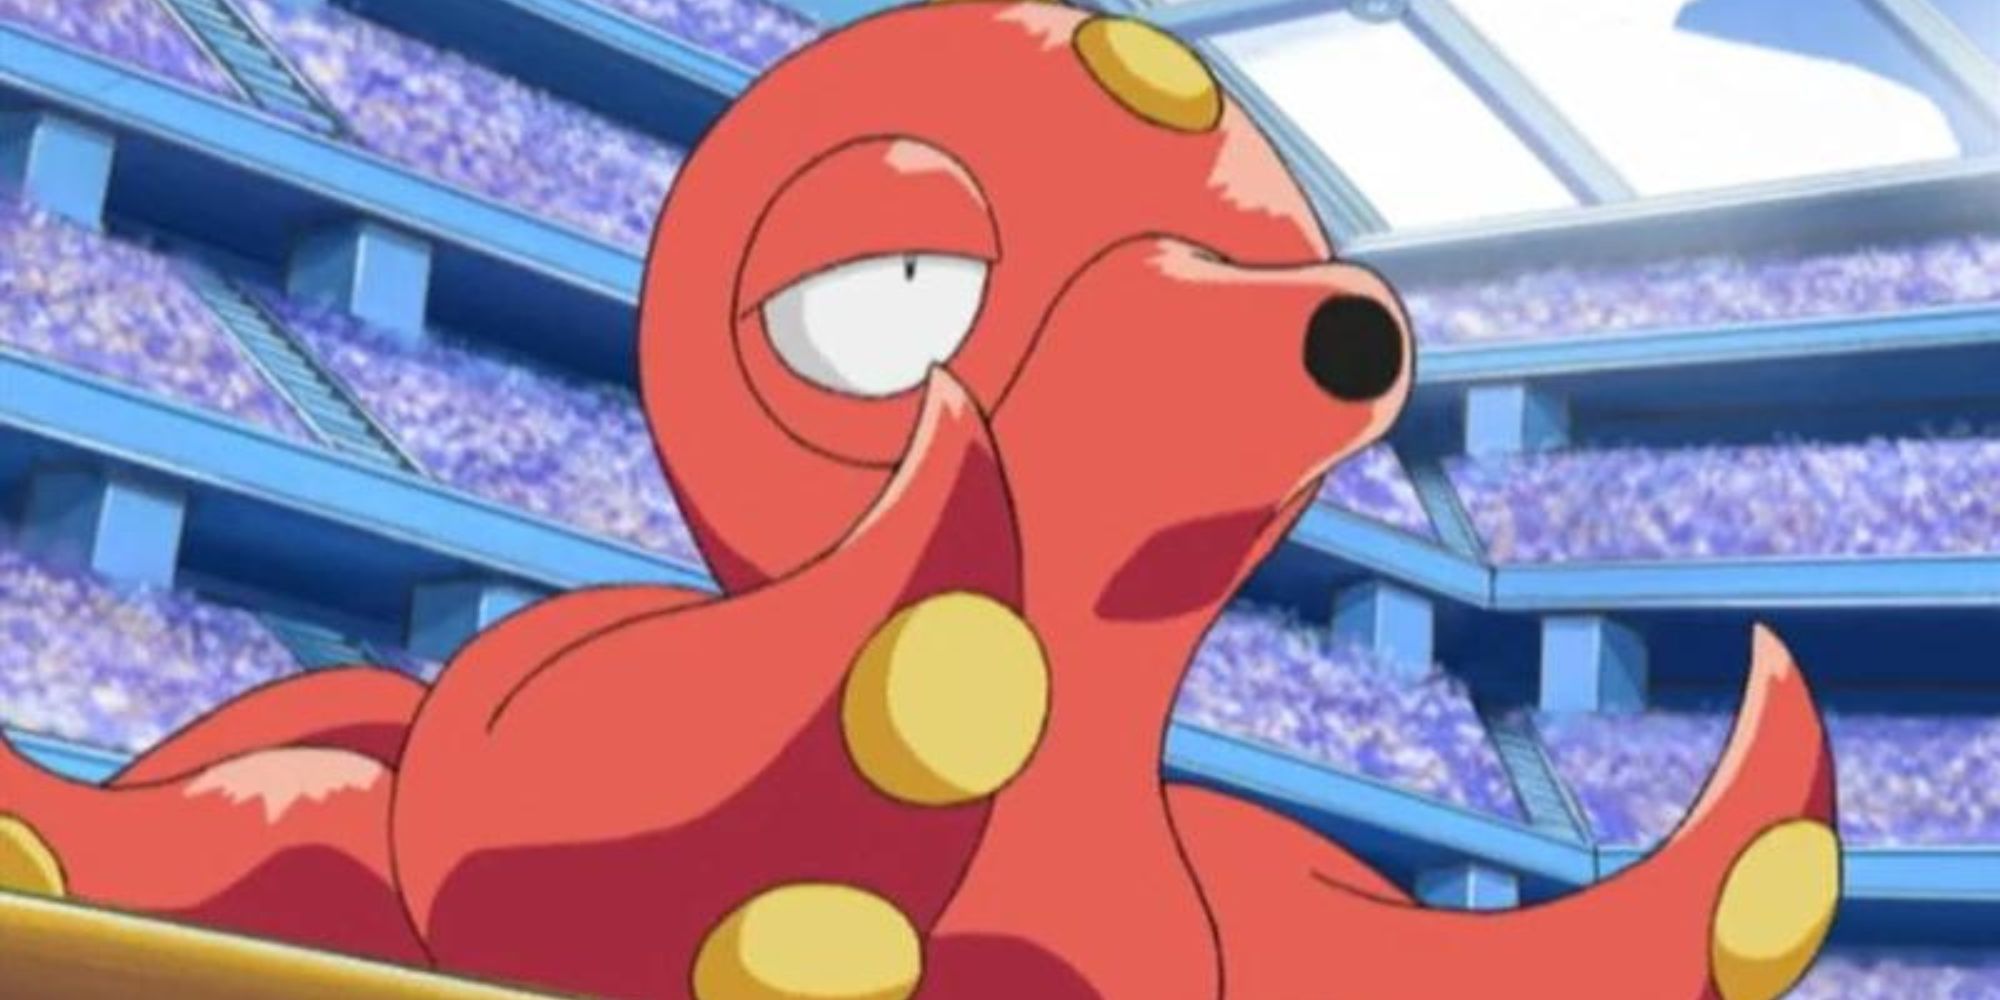 Octillery prepares for battle in a stadium full of people